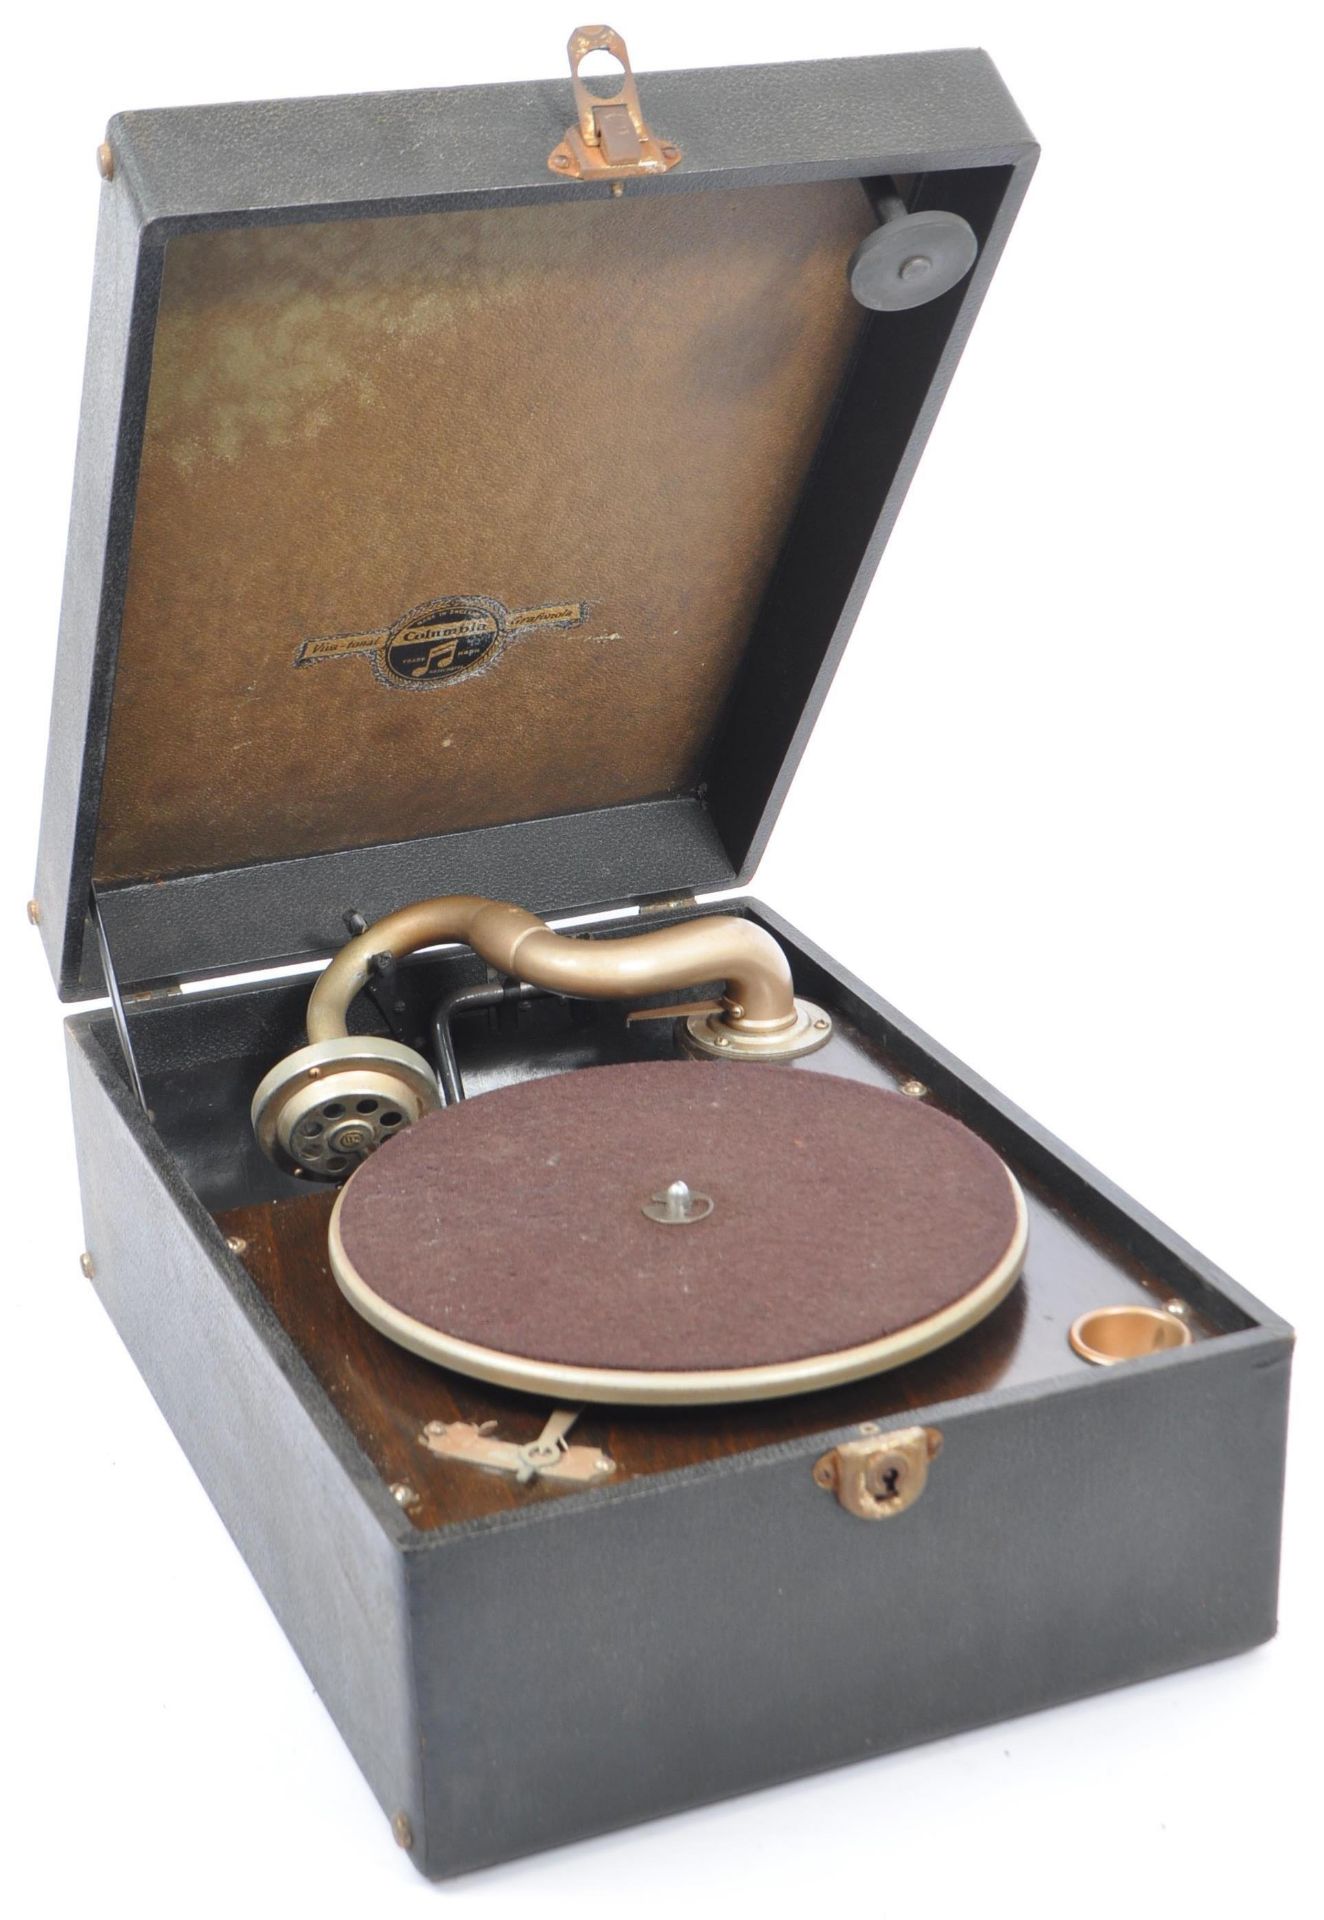 20TH CENTURY PORTABLE GRAMOPHONE BY COLUMBIA WITH DISCS - Image 2 of 4